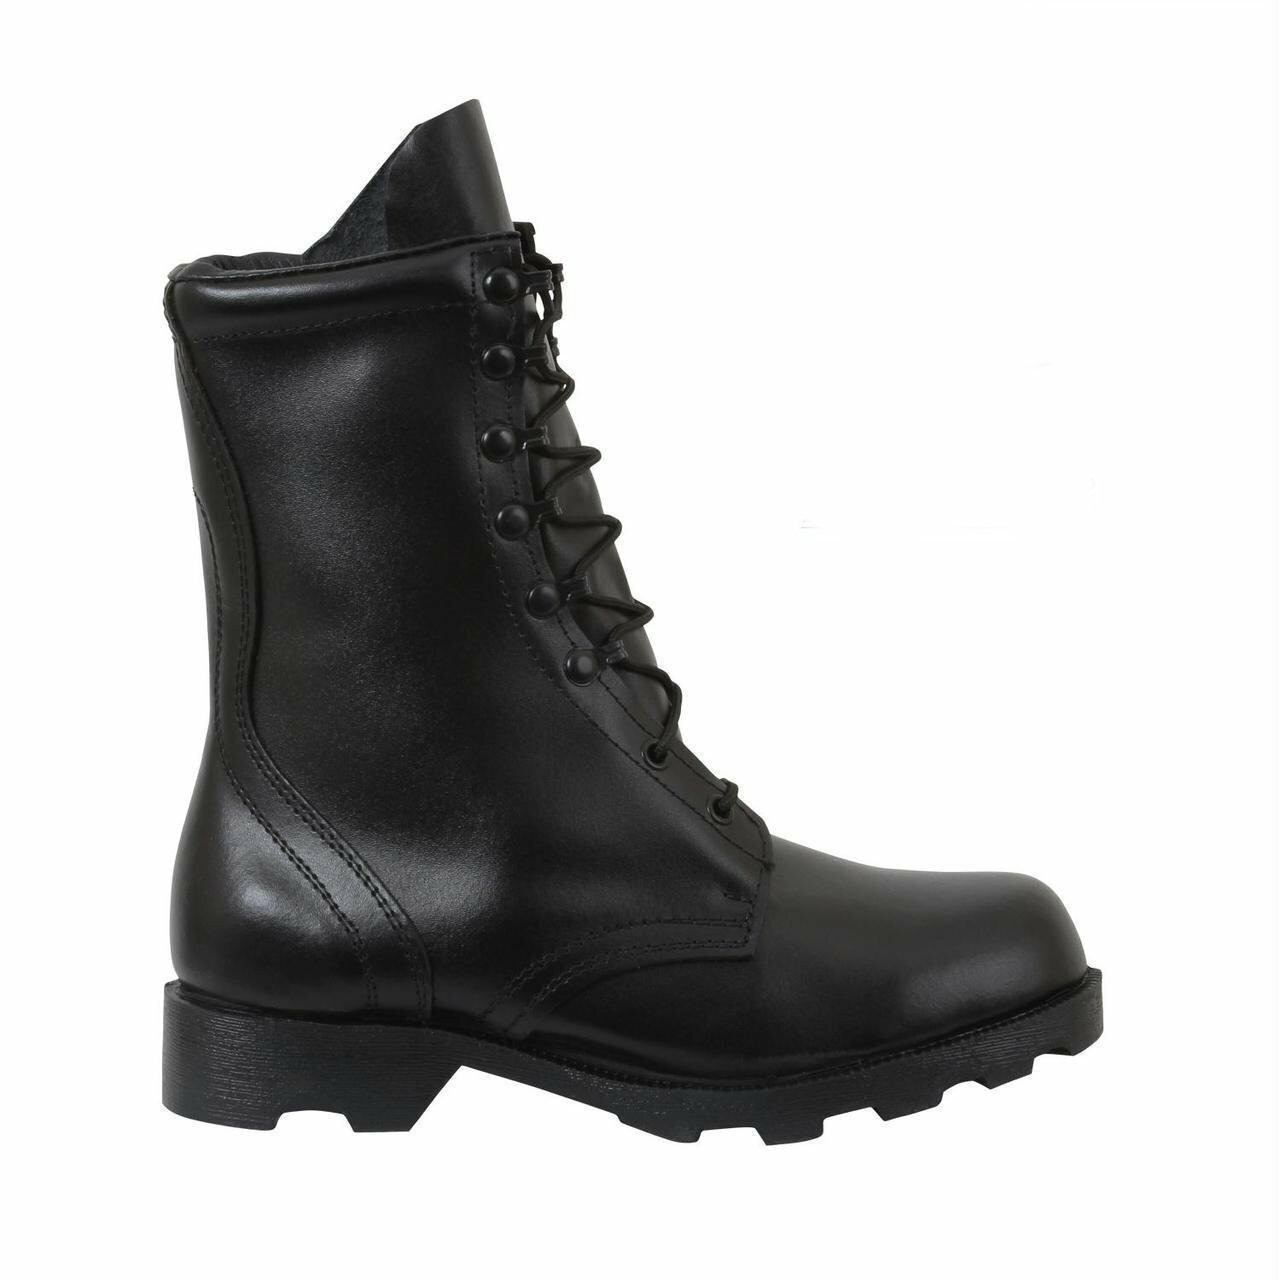 rothco combat boots